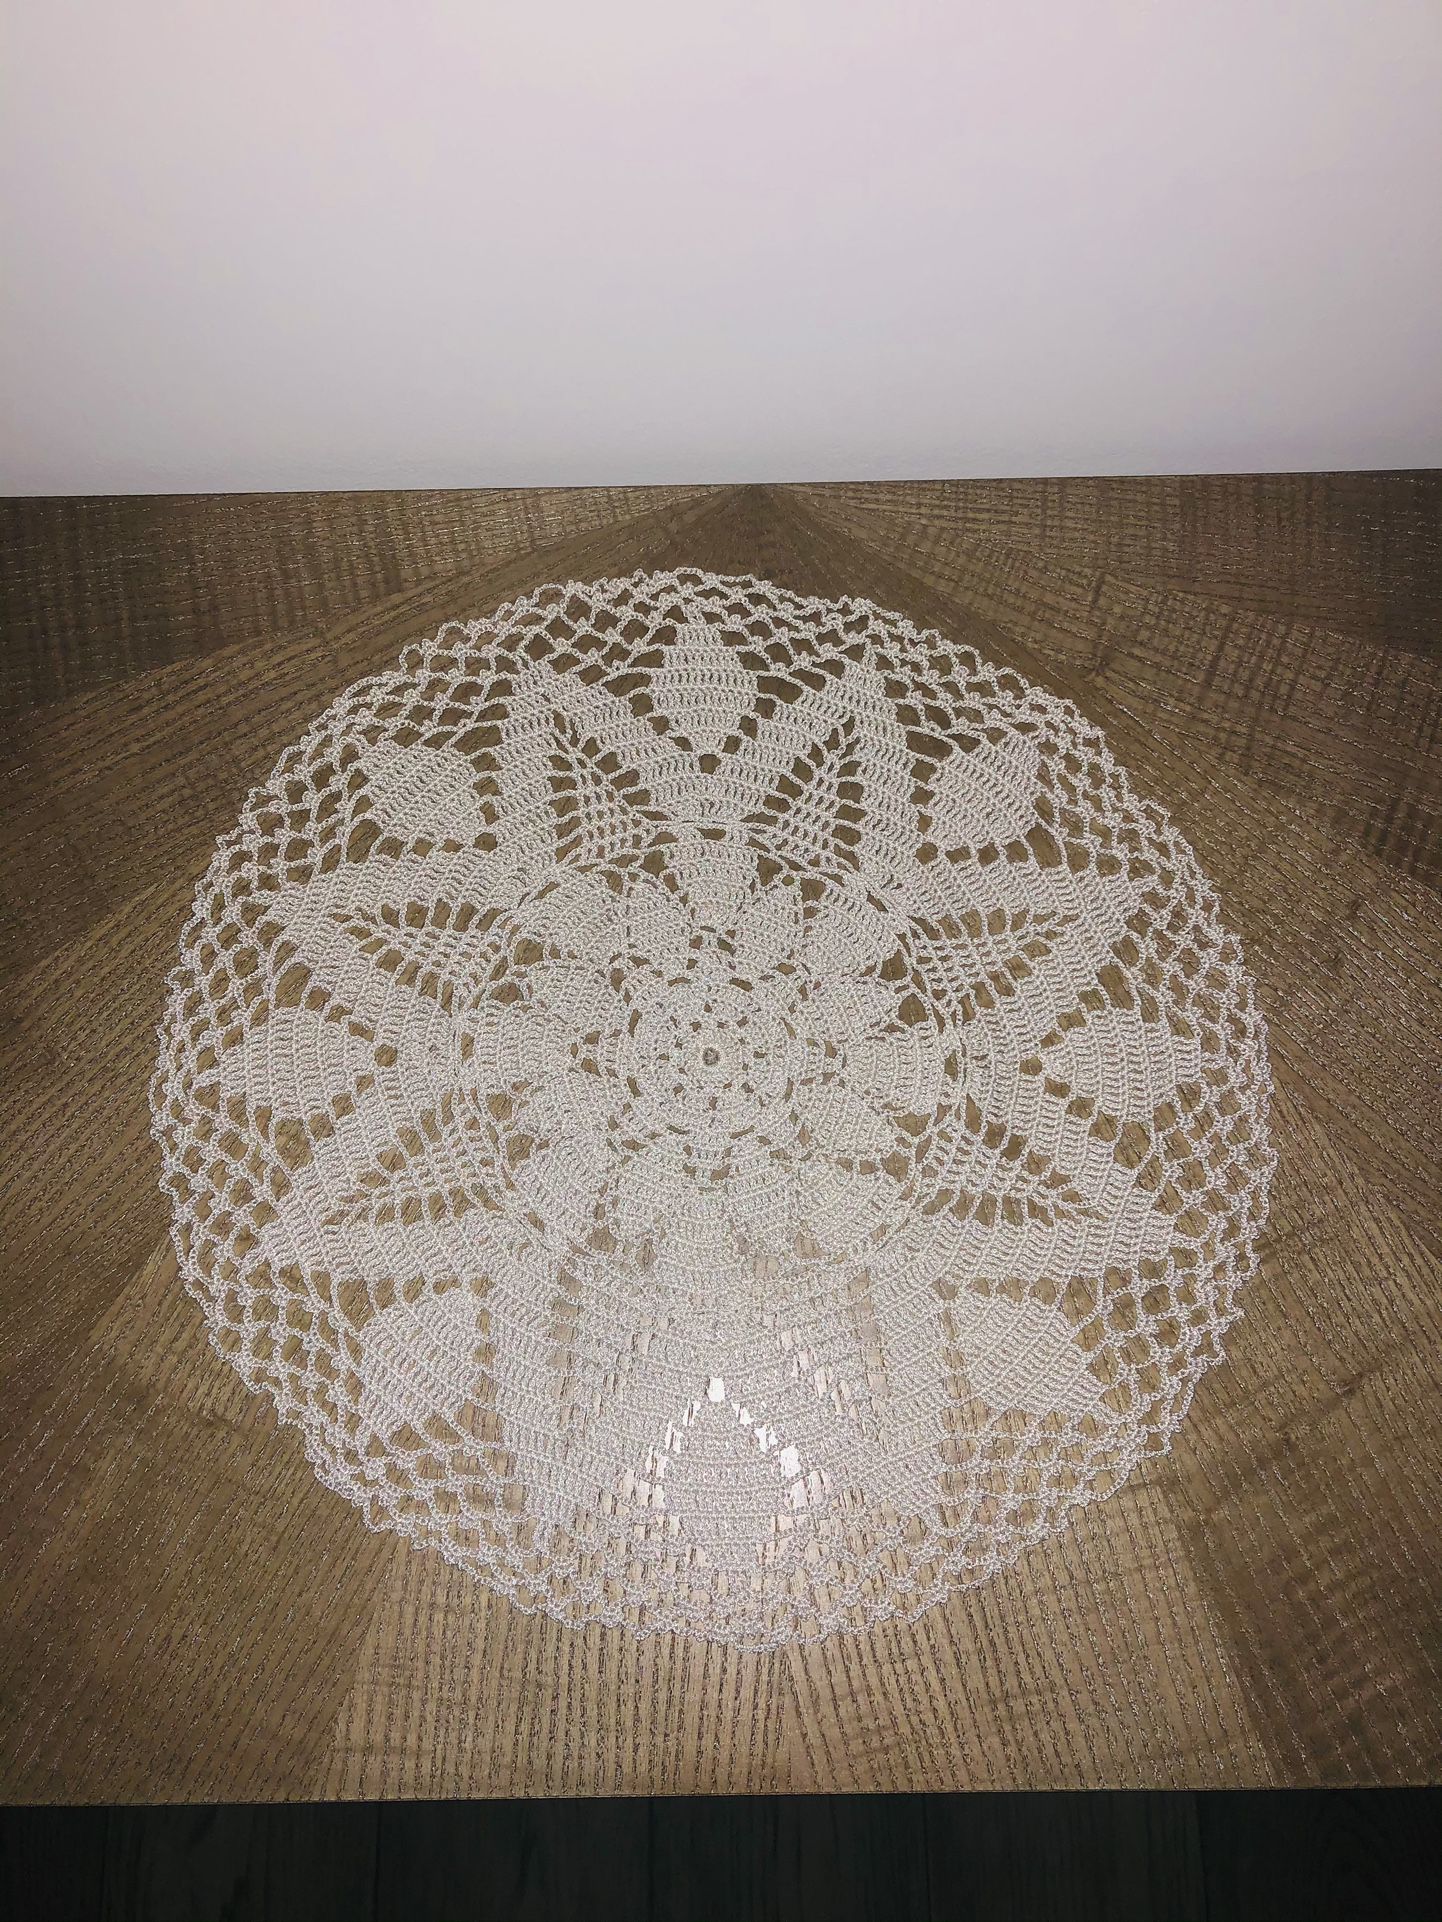 Hand Knitted Tablecloth 